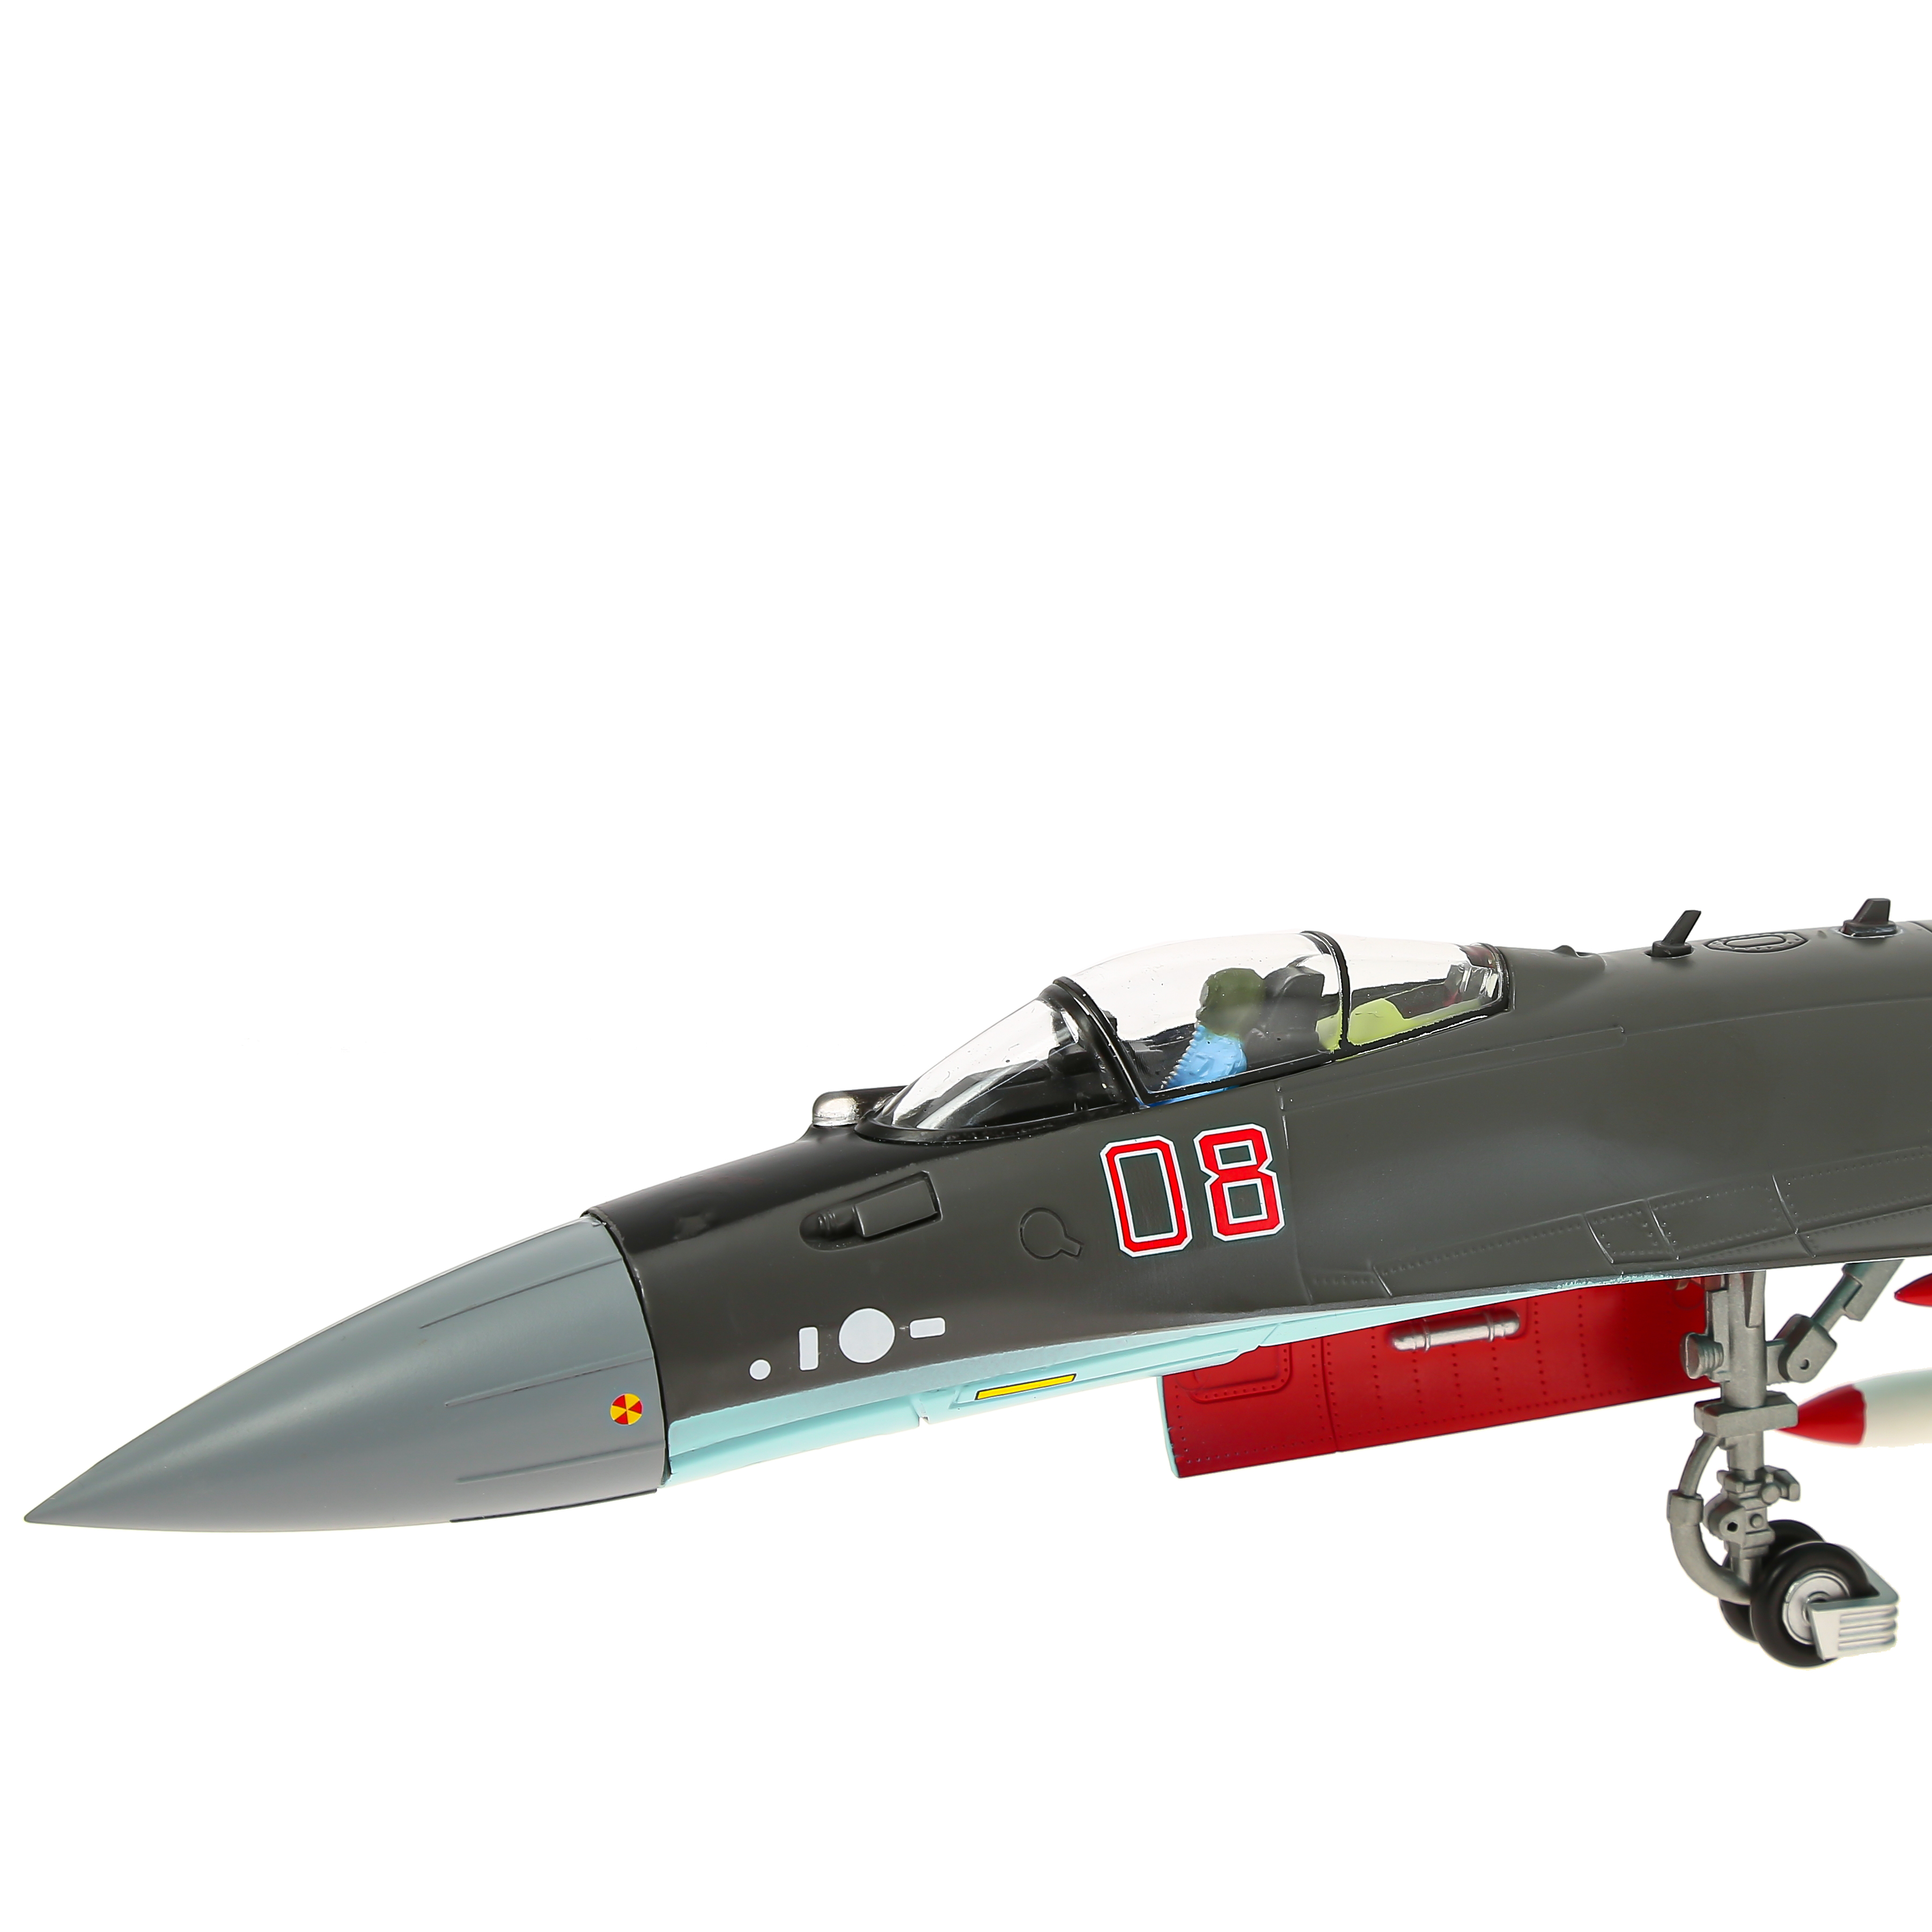       -35 ,  1:48.  47 . Large metal model of a Russian Su-35 fighter airplane, scale 1:48. Length 47 cm. # 8 hobbyplus.ru